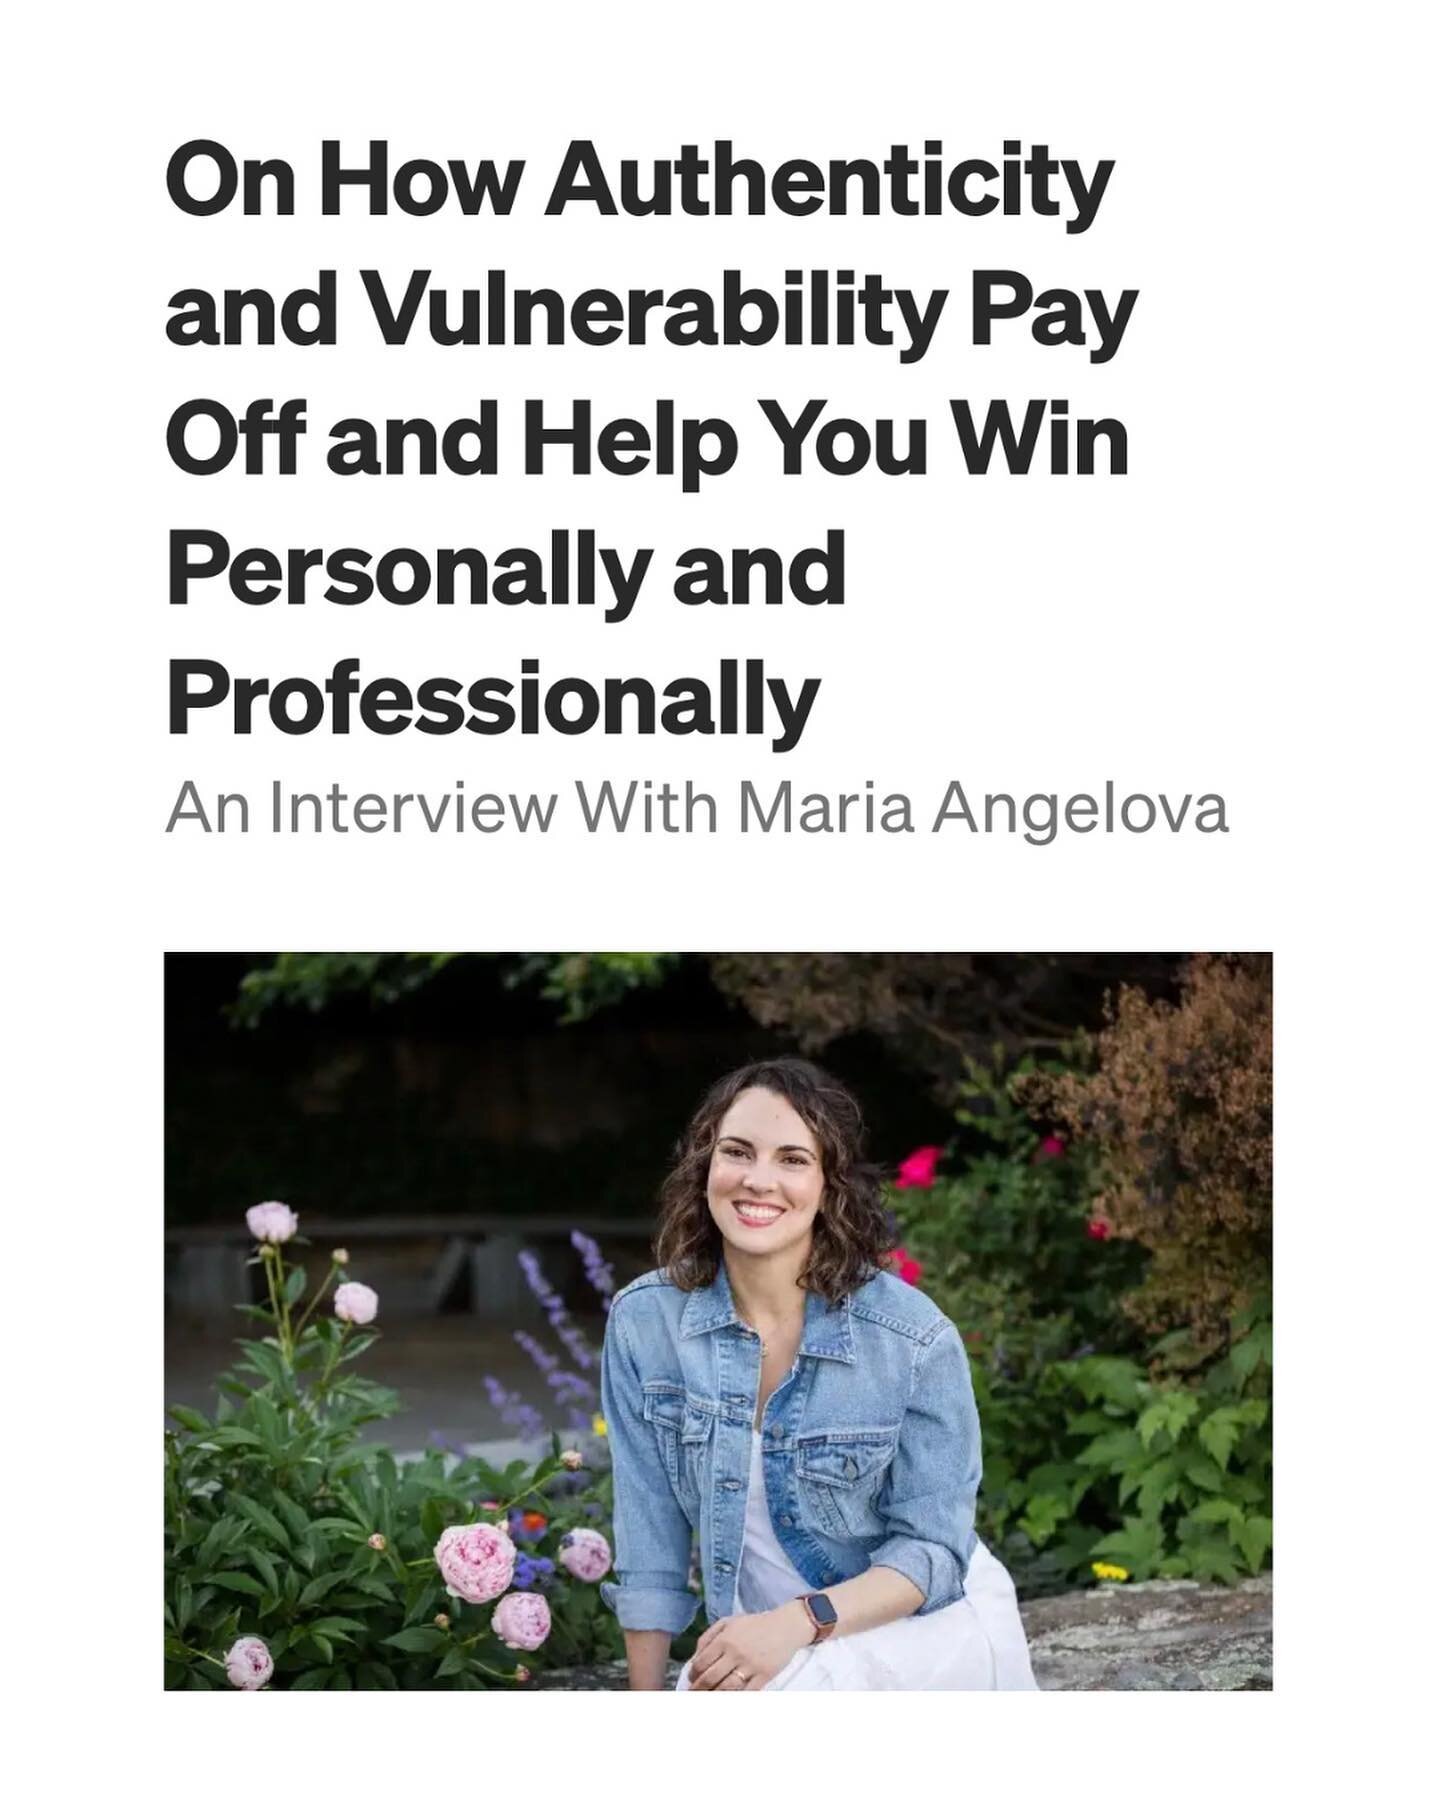 Want to know what my biggest fear used to be? Being VULNERABLE.

And now here I am sharing my thoughts on 5 Ways Being Authentic &amp; Vulnerable Pay Off, and Help You Win, Personally &amp; Professionally with Authority Magazine and @medium ☺️

On to